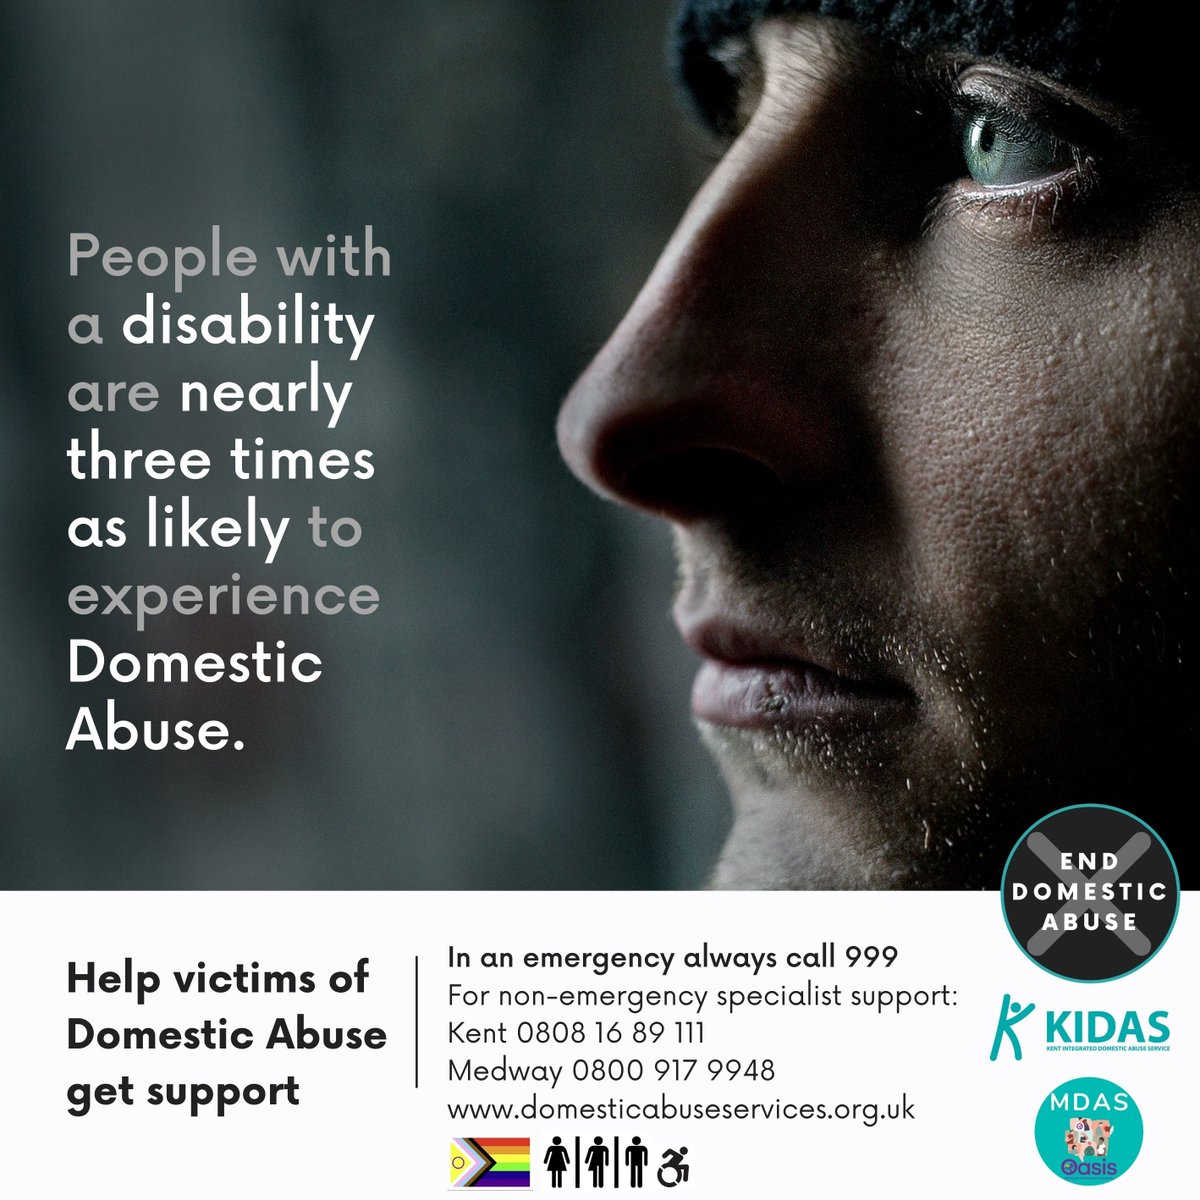 People with a disability are nearly 3 times as likely to experience #DomesticAbuse (ONS). A range of tactics can be used to coerce, control & victimise. Learn more & help get victims to safety this #LDWeek23  domesticabuseservices.org.uk #KnowSeeSpeakOut #LearningDisabilityAwareness